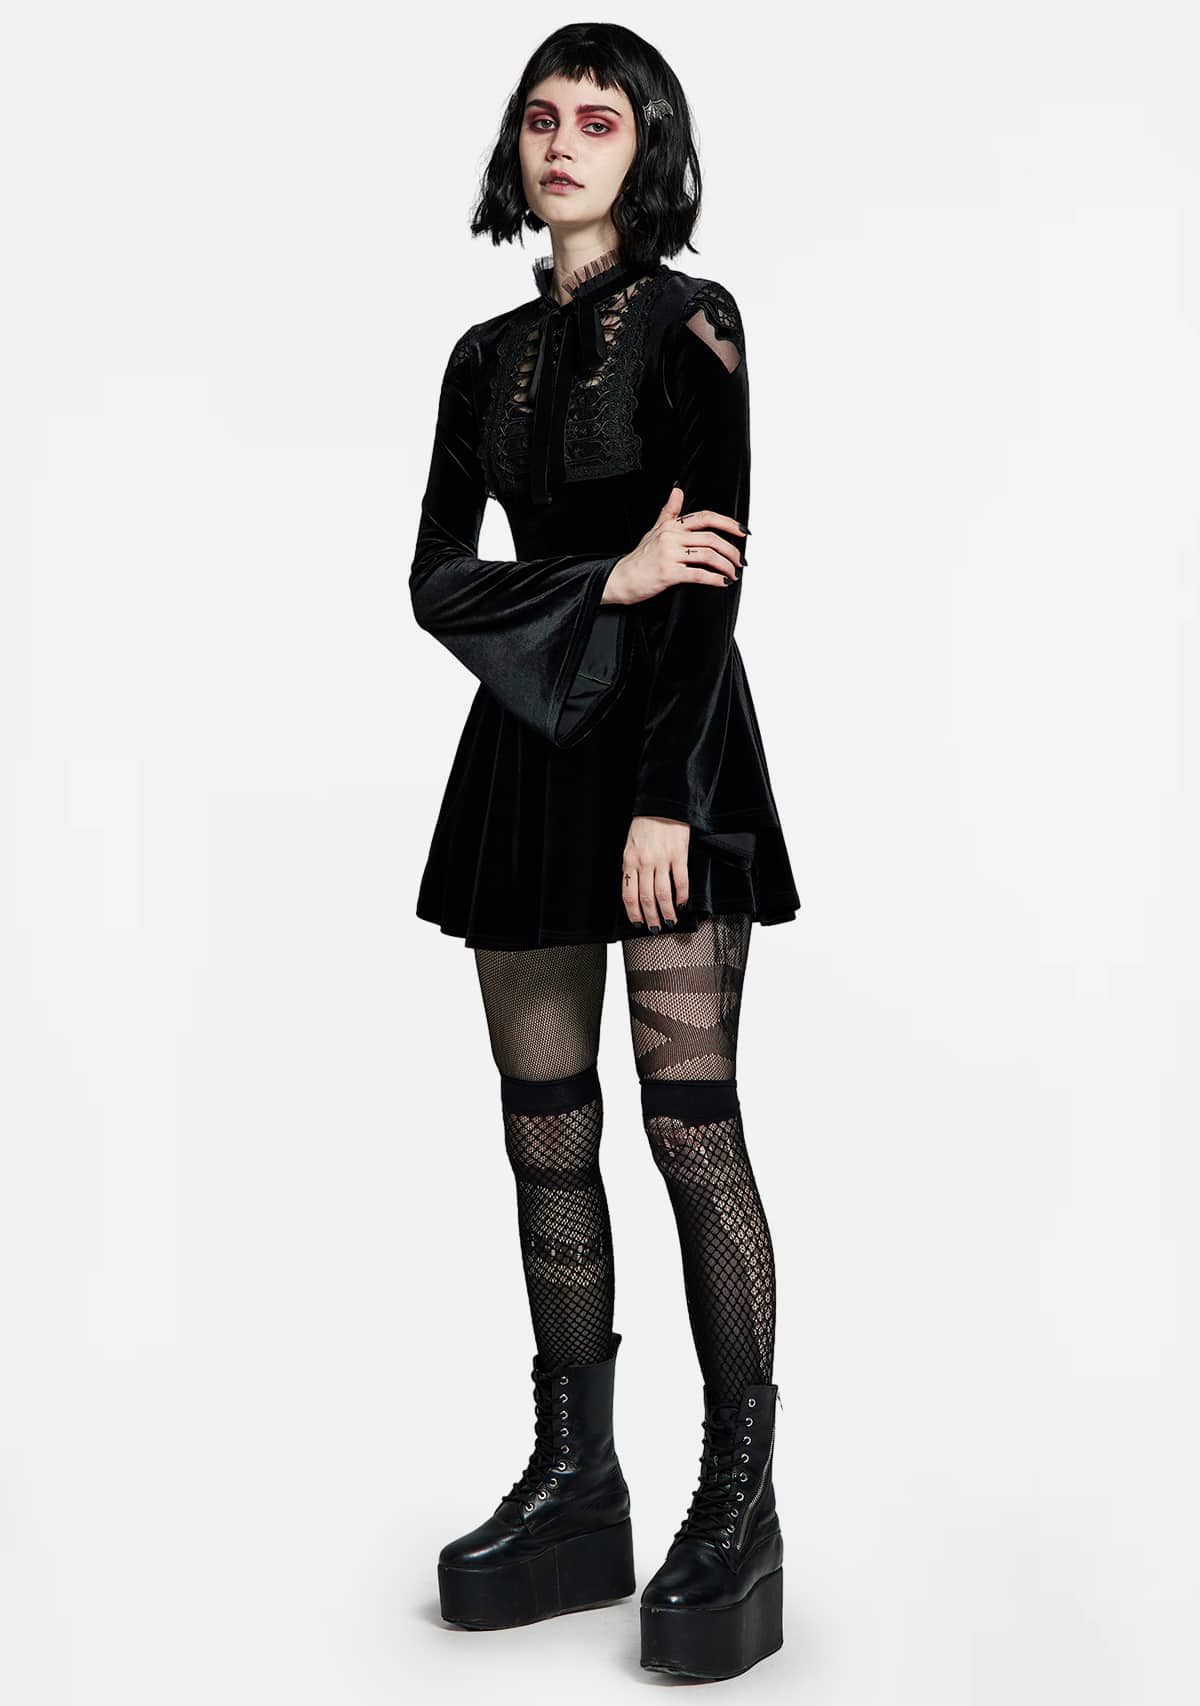 Chic Velvet Gothic Dress with Lace Trim